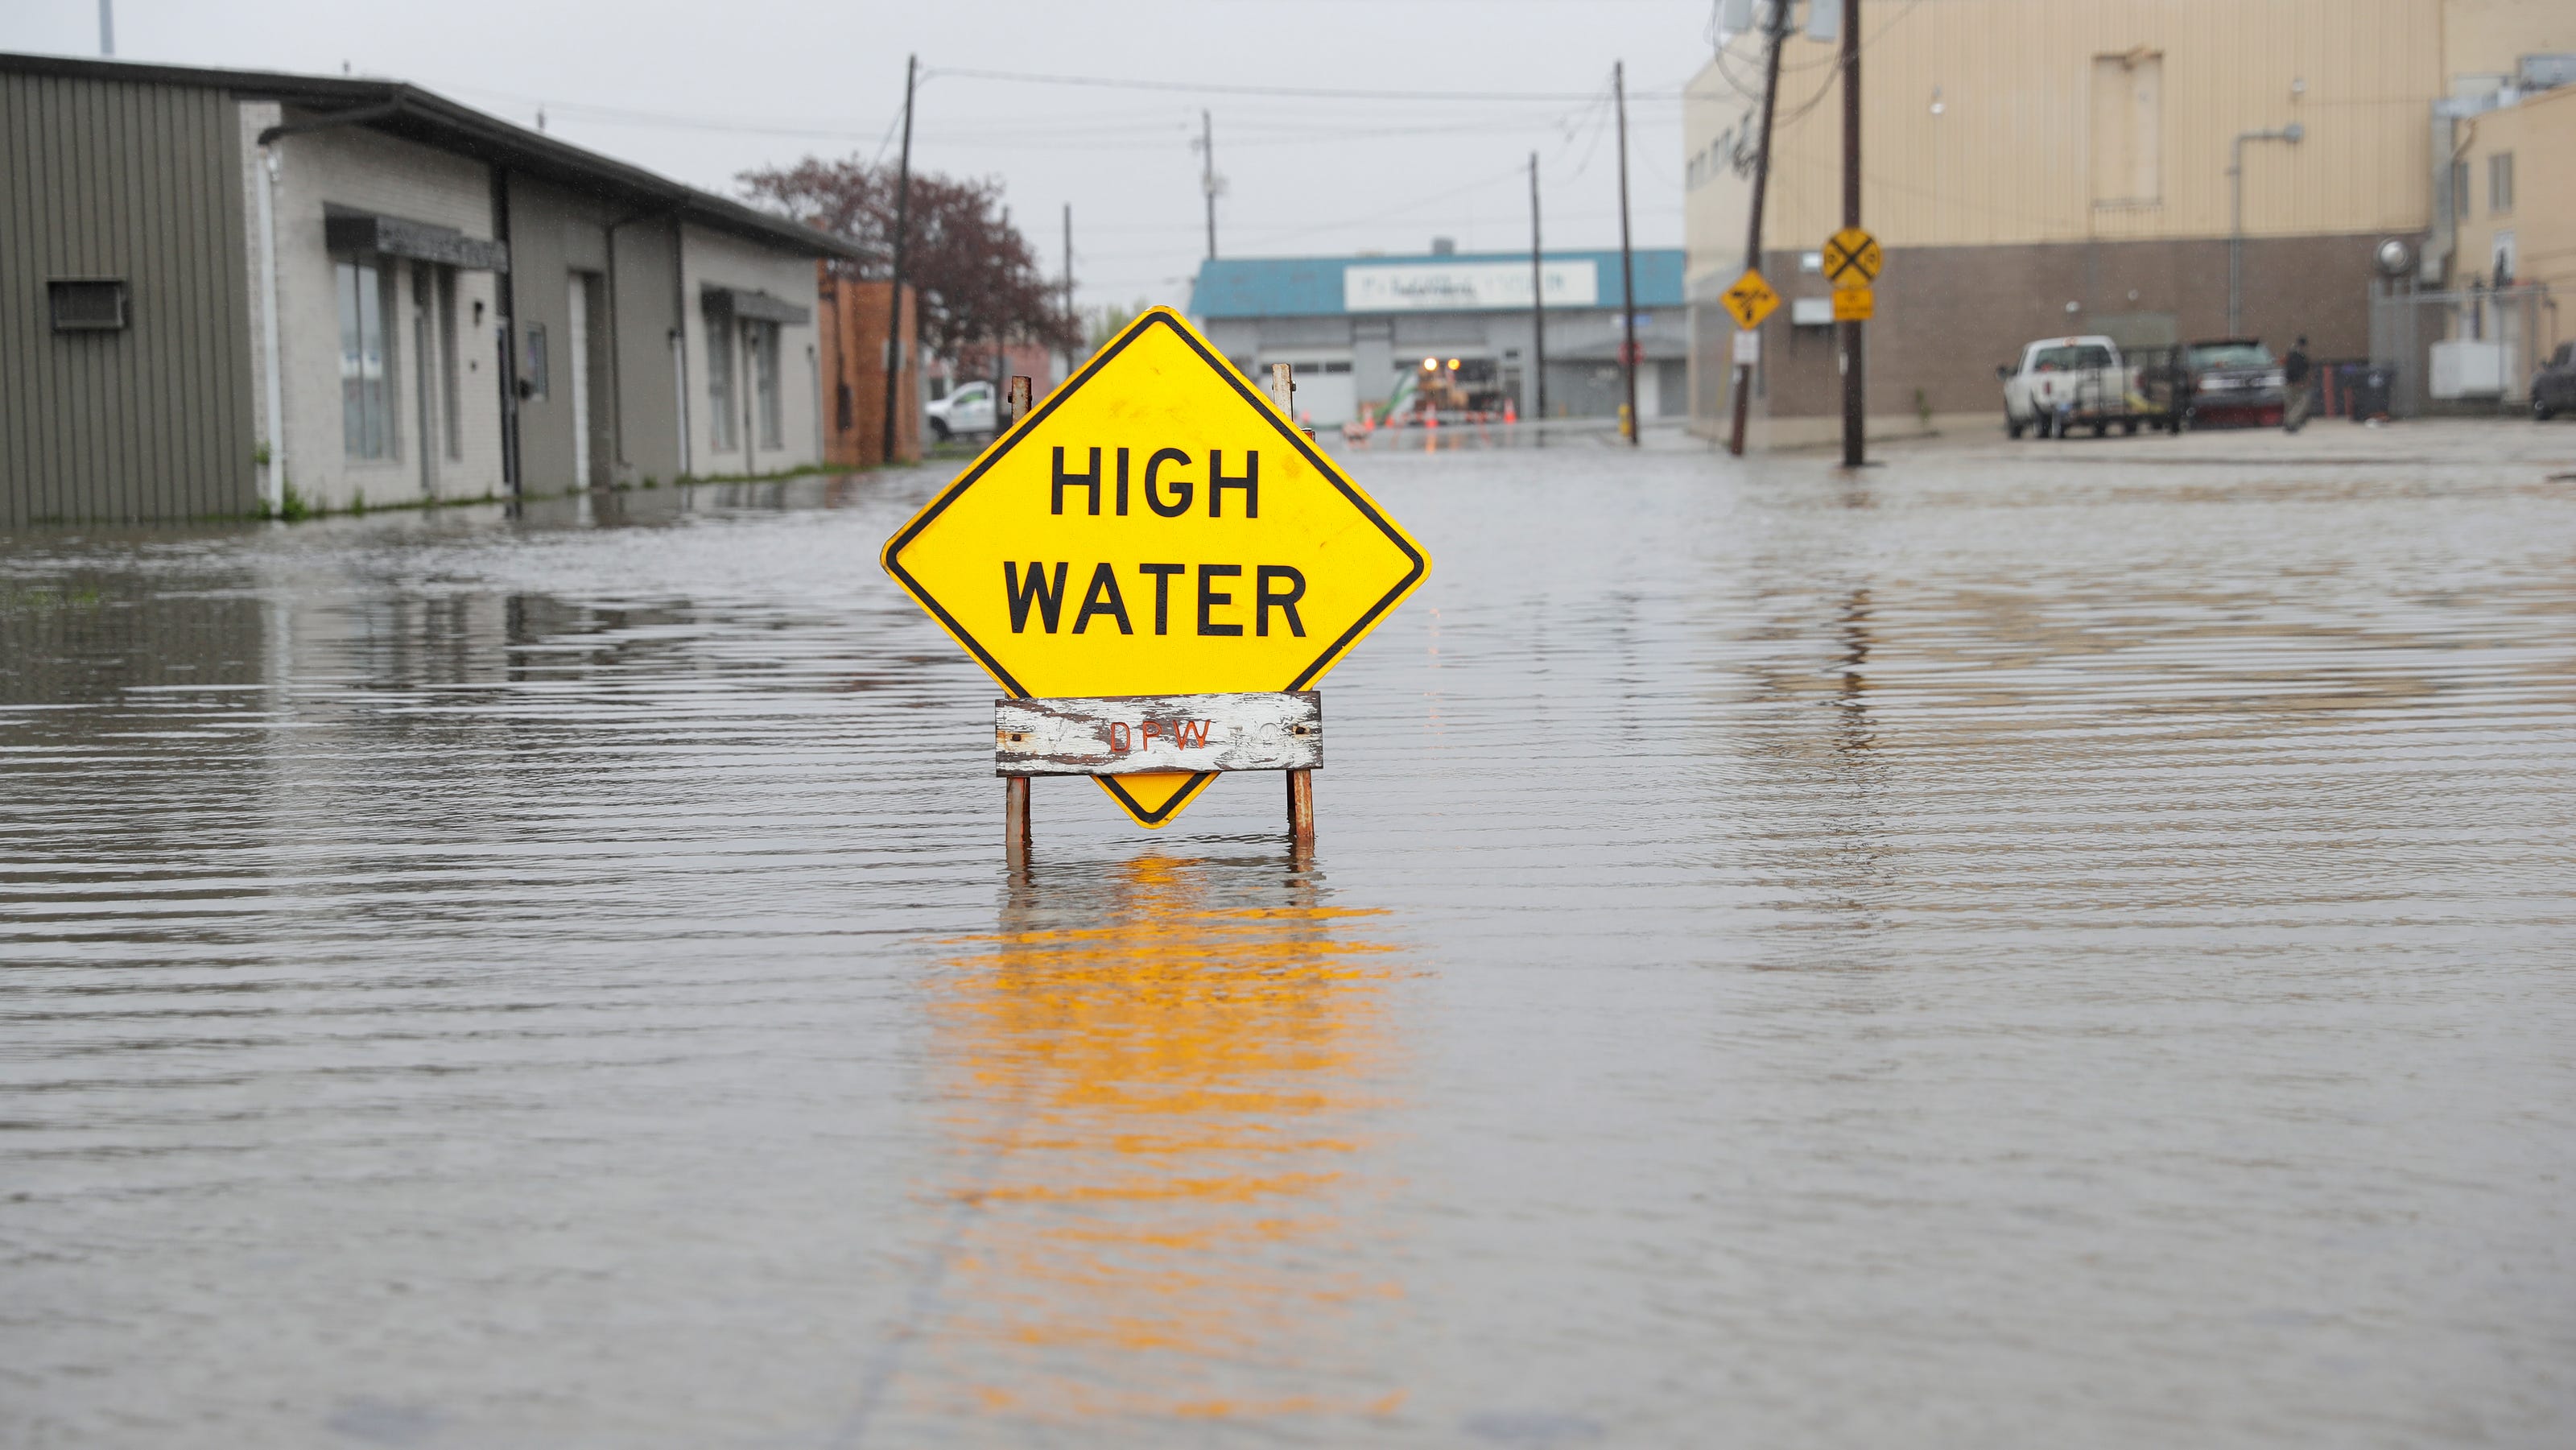 Green Bay City Council puts off decision on 'green' infrastructure, demands proof it will reduce flooding - Green Bay Press Gazette